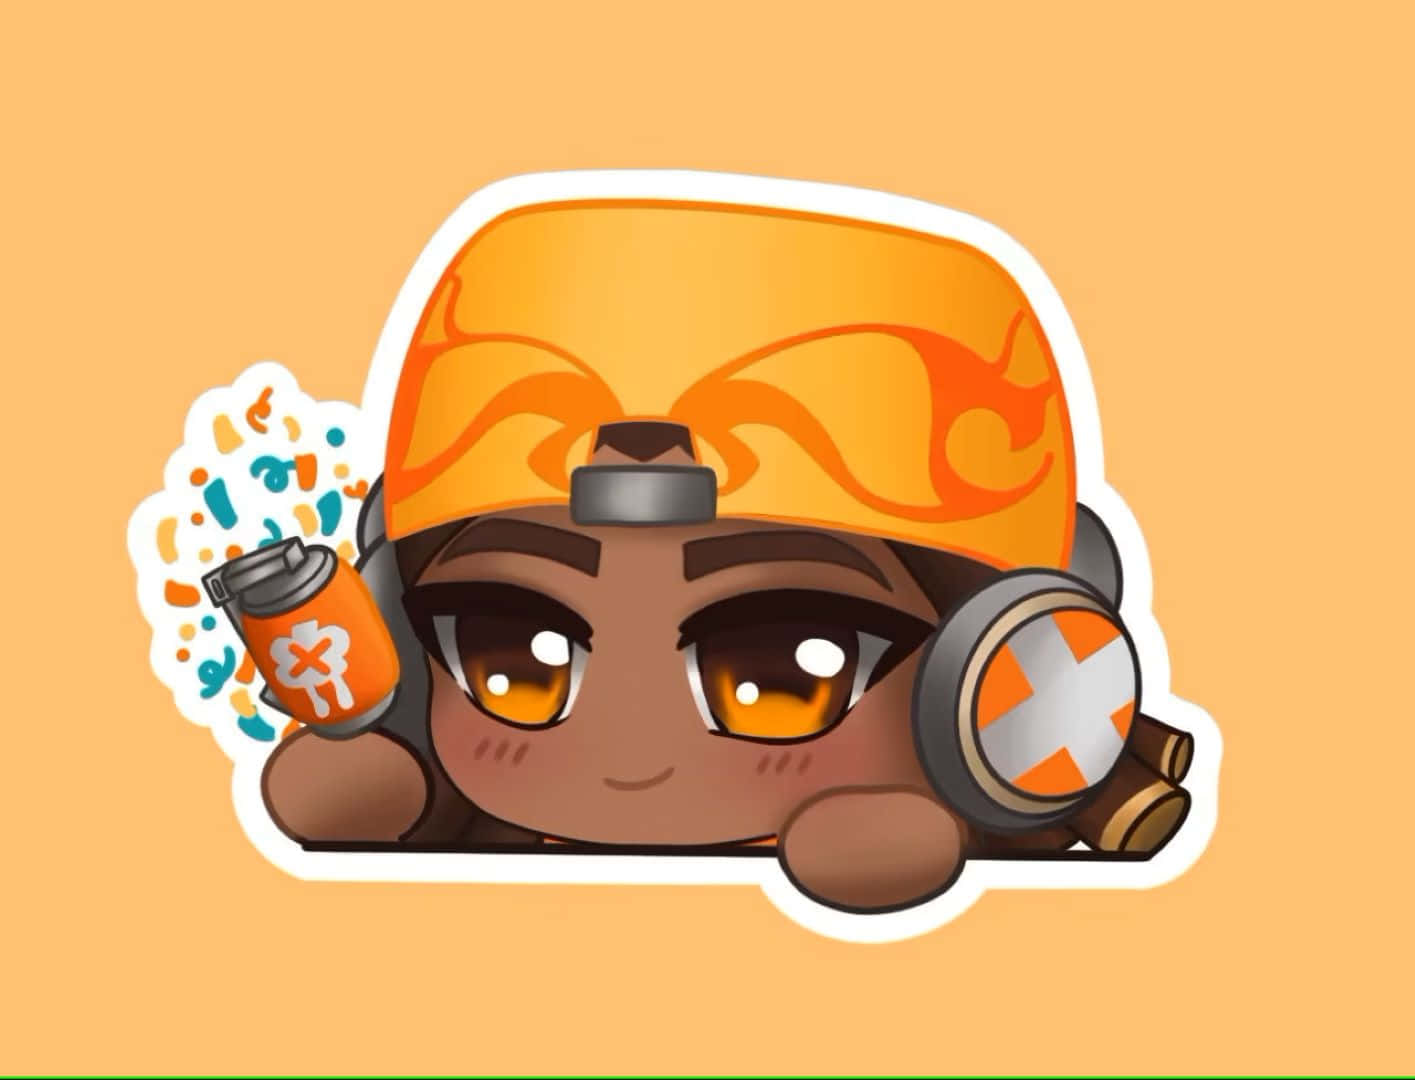 Download Chibi Style Explosive Character Sticker Wallpaper | Wallpapers.com